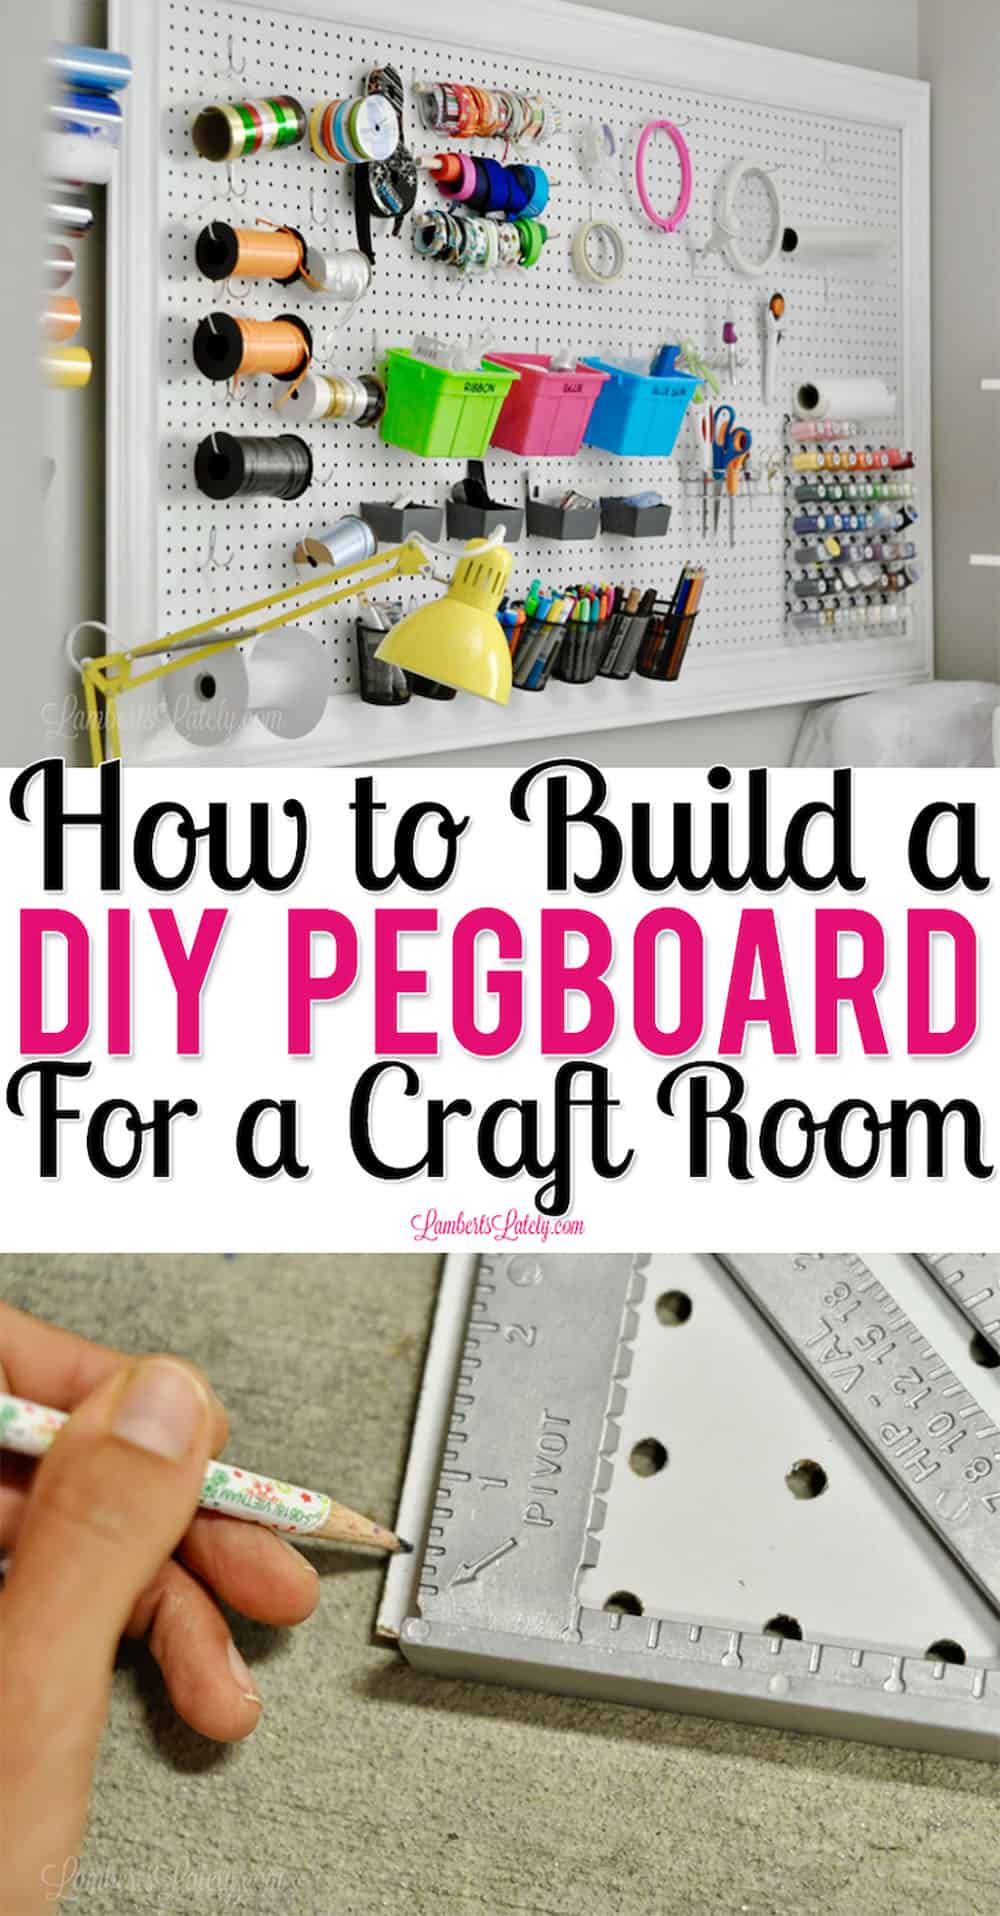 This tutorial for building a DIY pegboard for a craft room shows building, installation, and organization of a pegboard. See step by step instructions from how to build, how to hang, and how to make into a gorgeous decor piece!